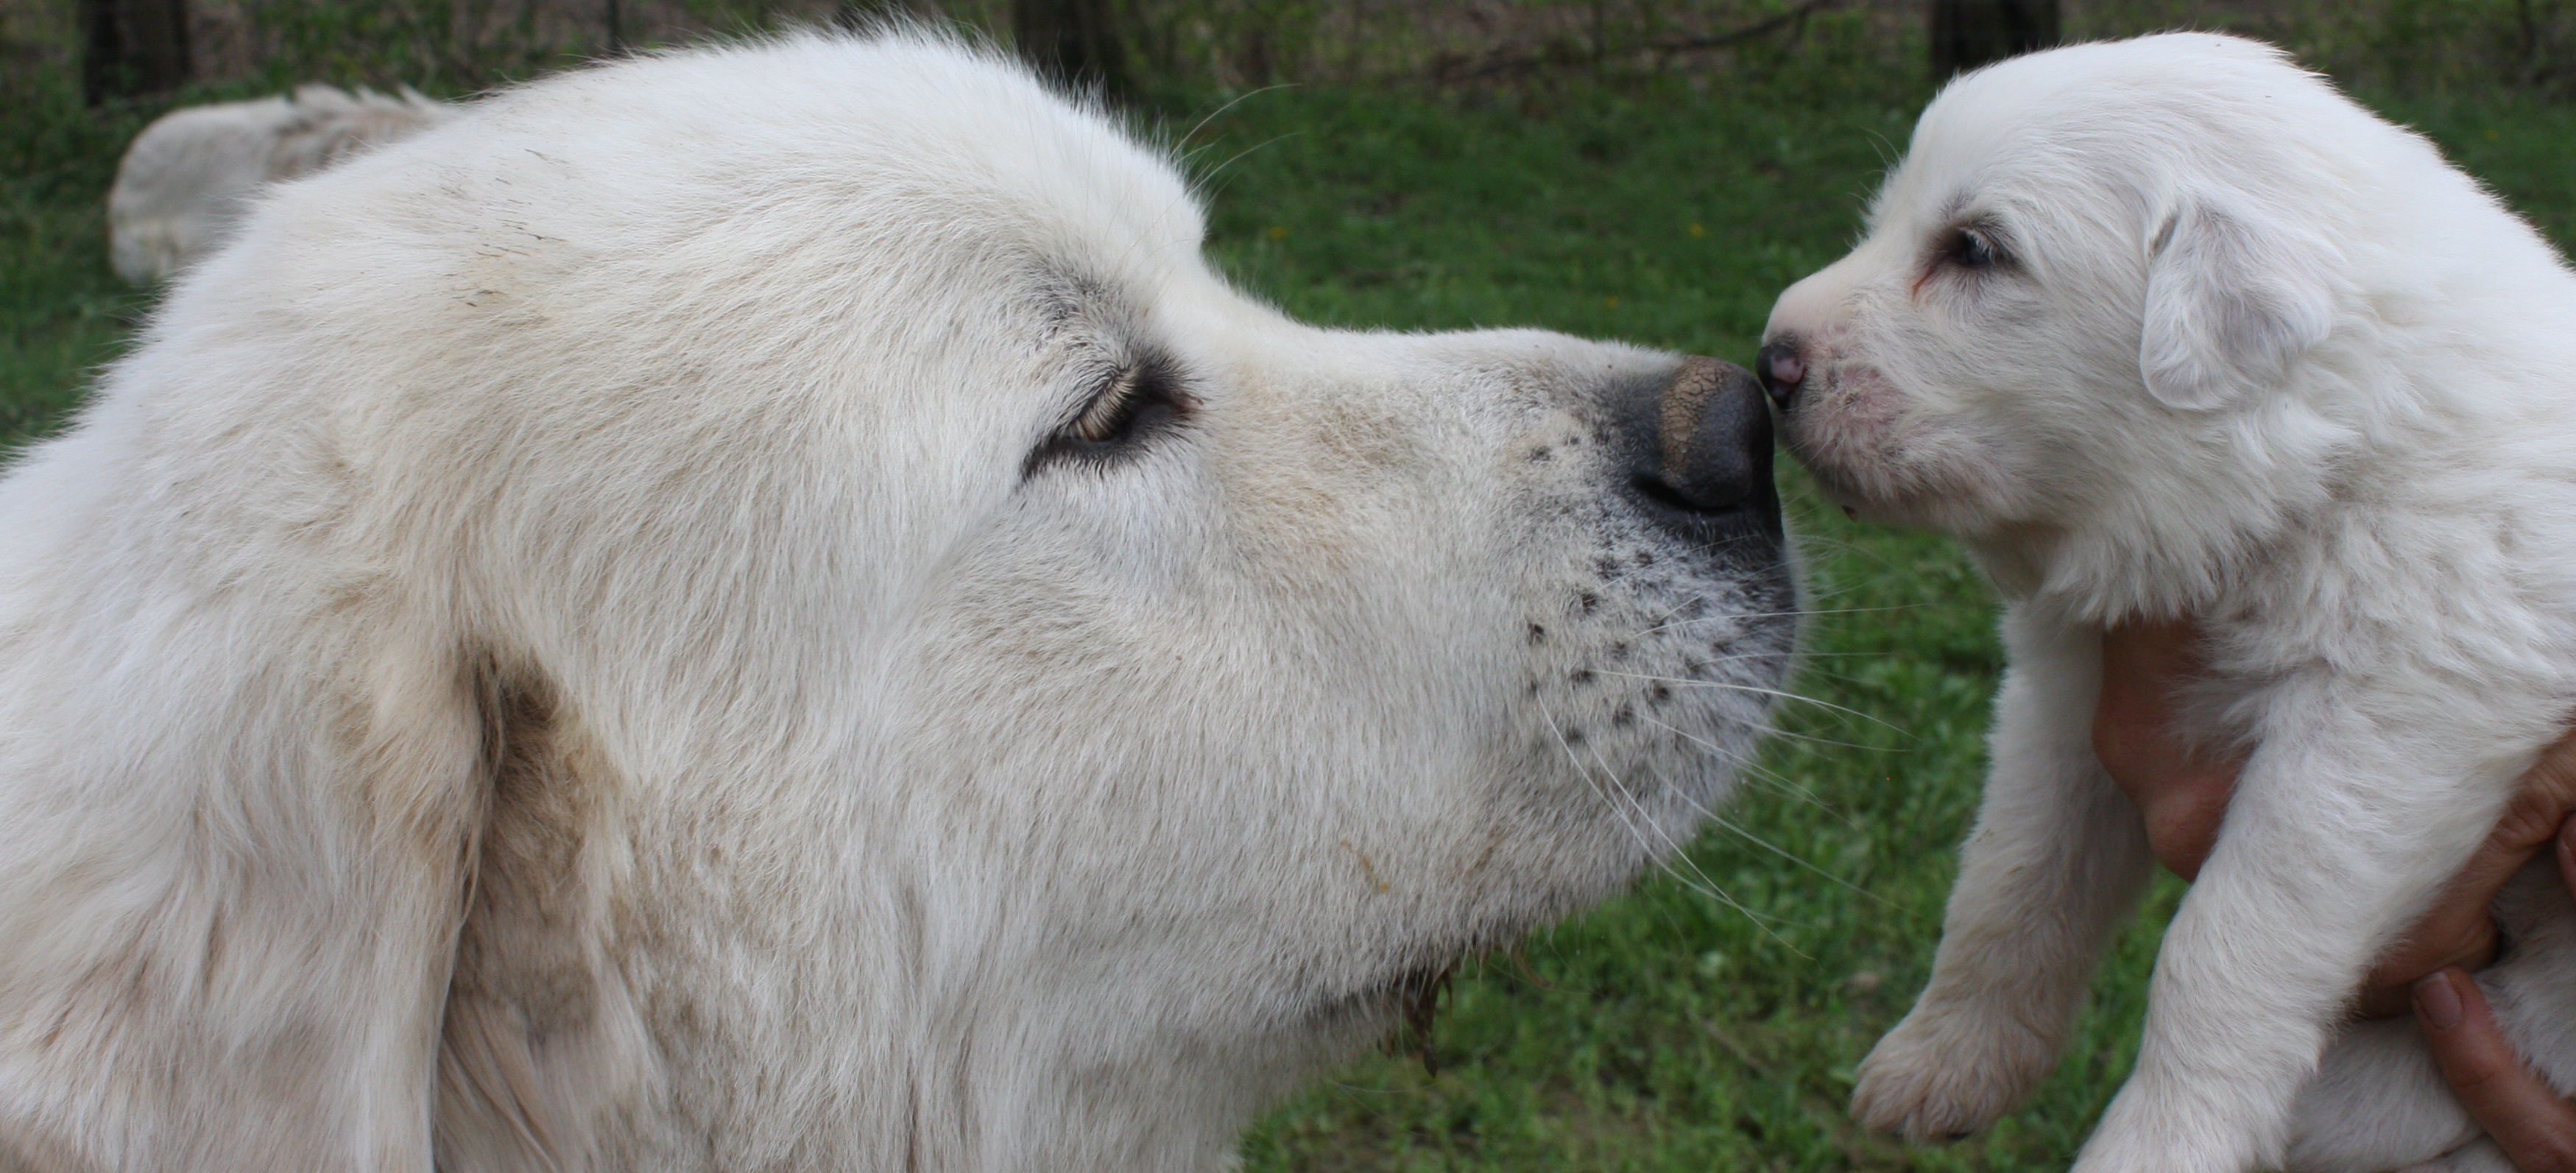 Tender Great Pyrenees dog with her baby wallpaper